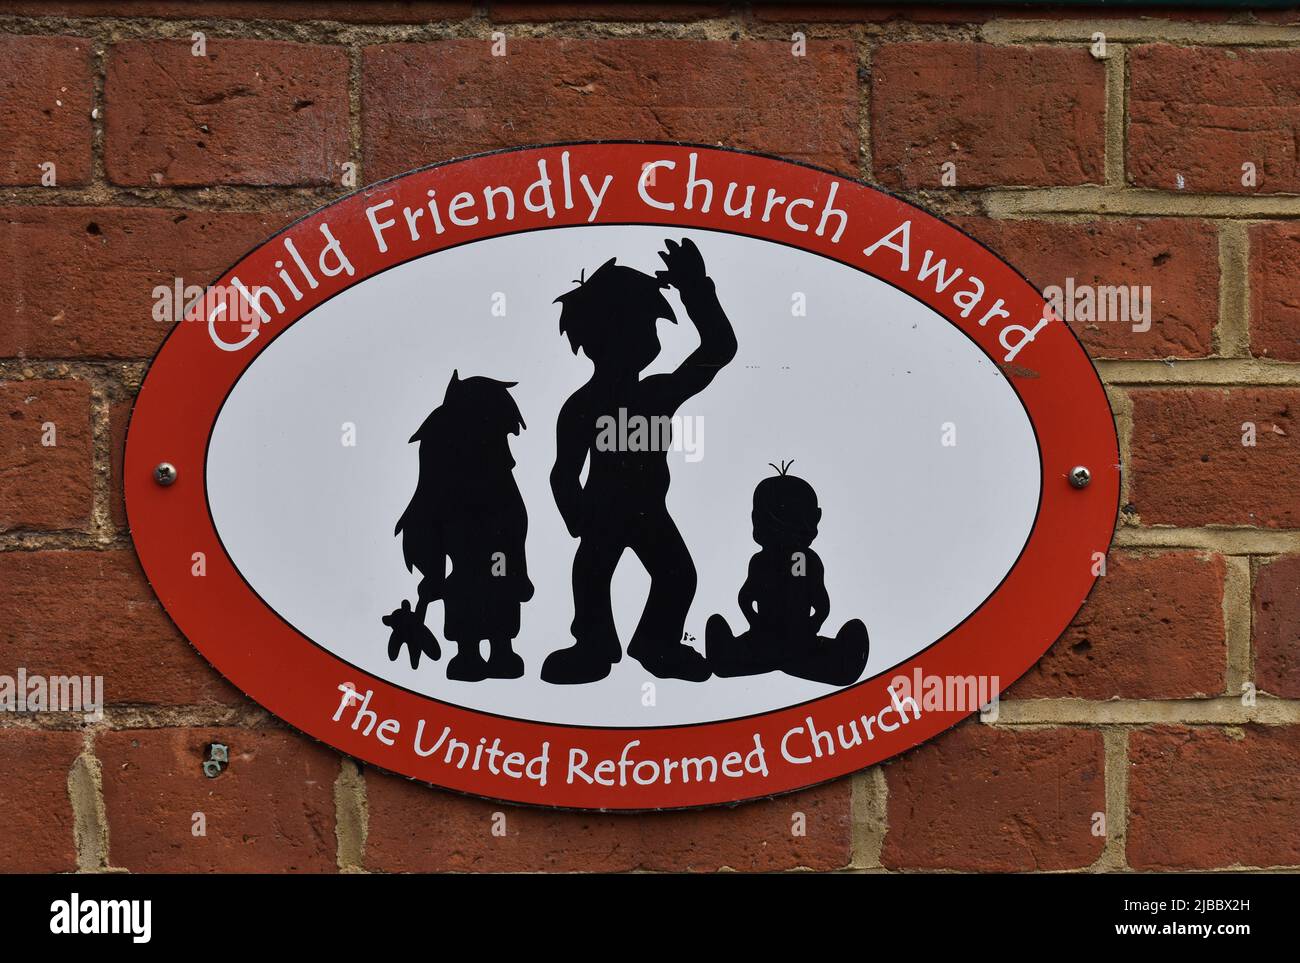 Notice on a brick wall by a church in Newport Pagnell: 'Child Friendly Church Award'. Stock Photo